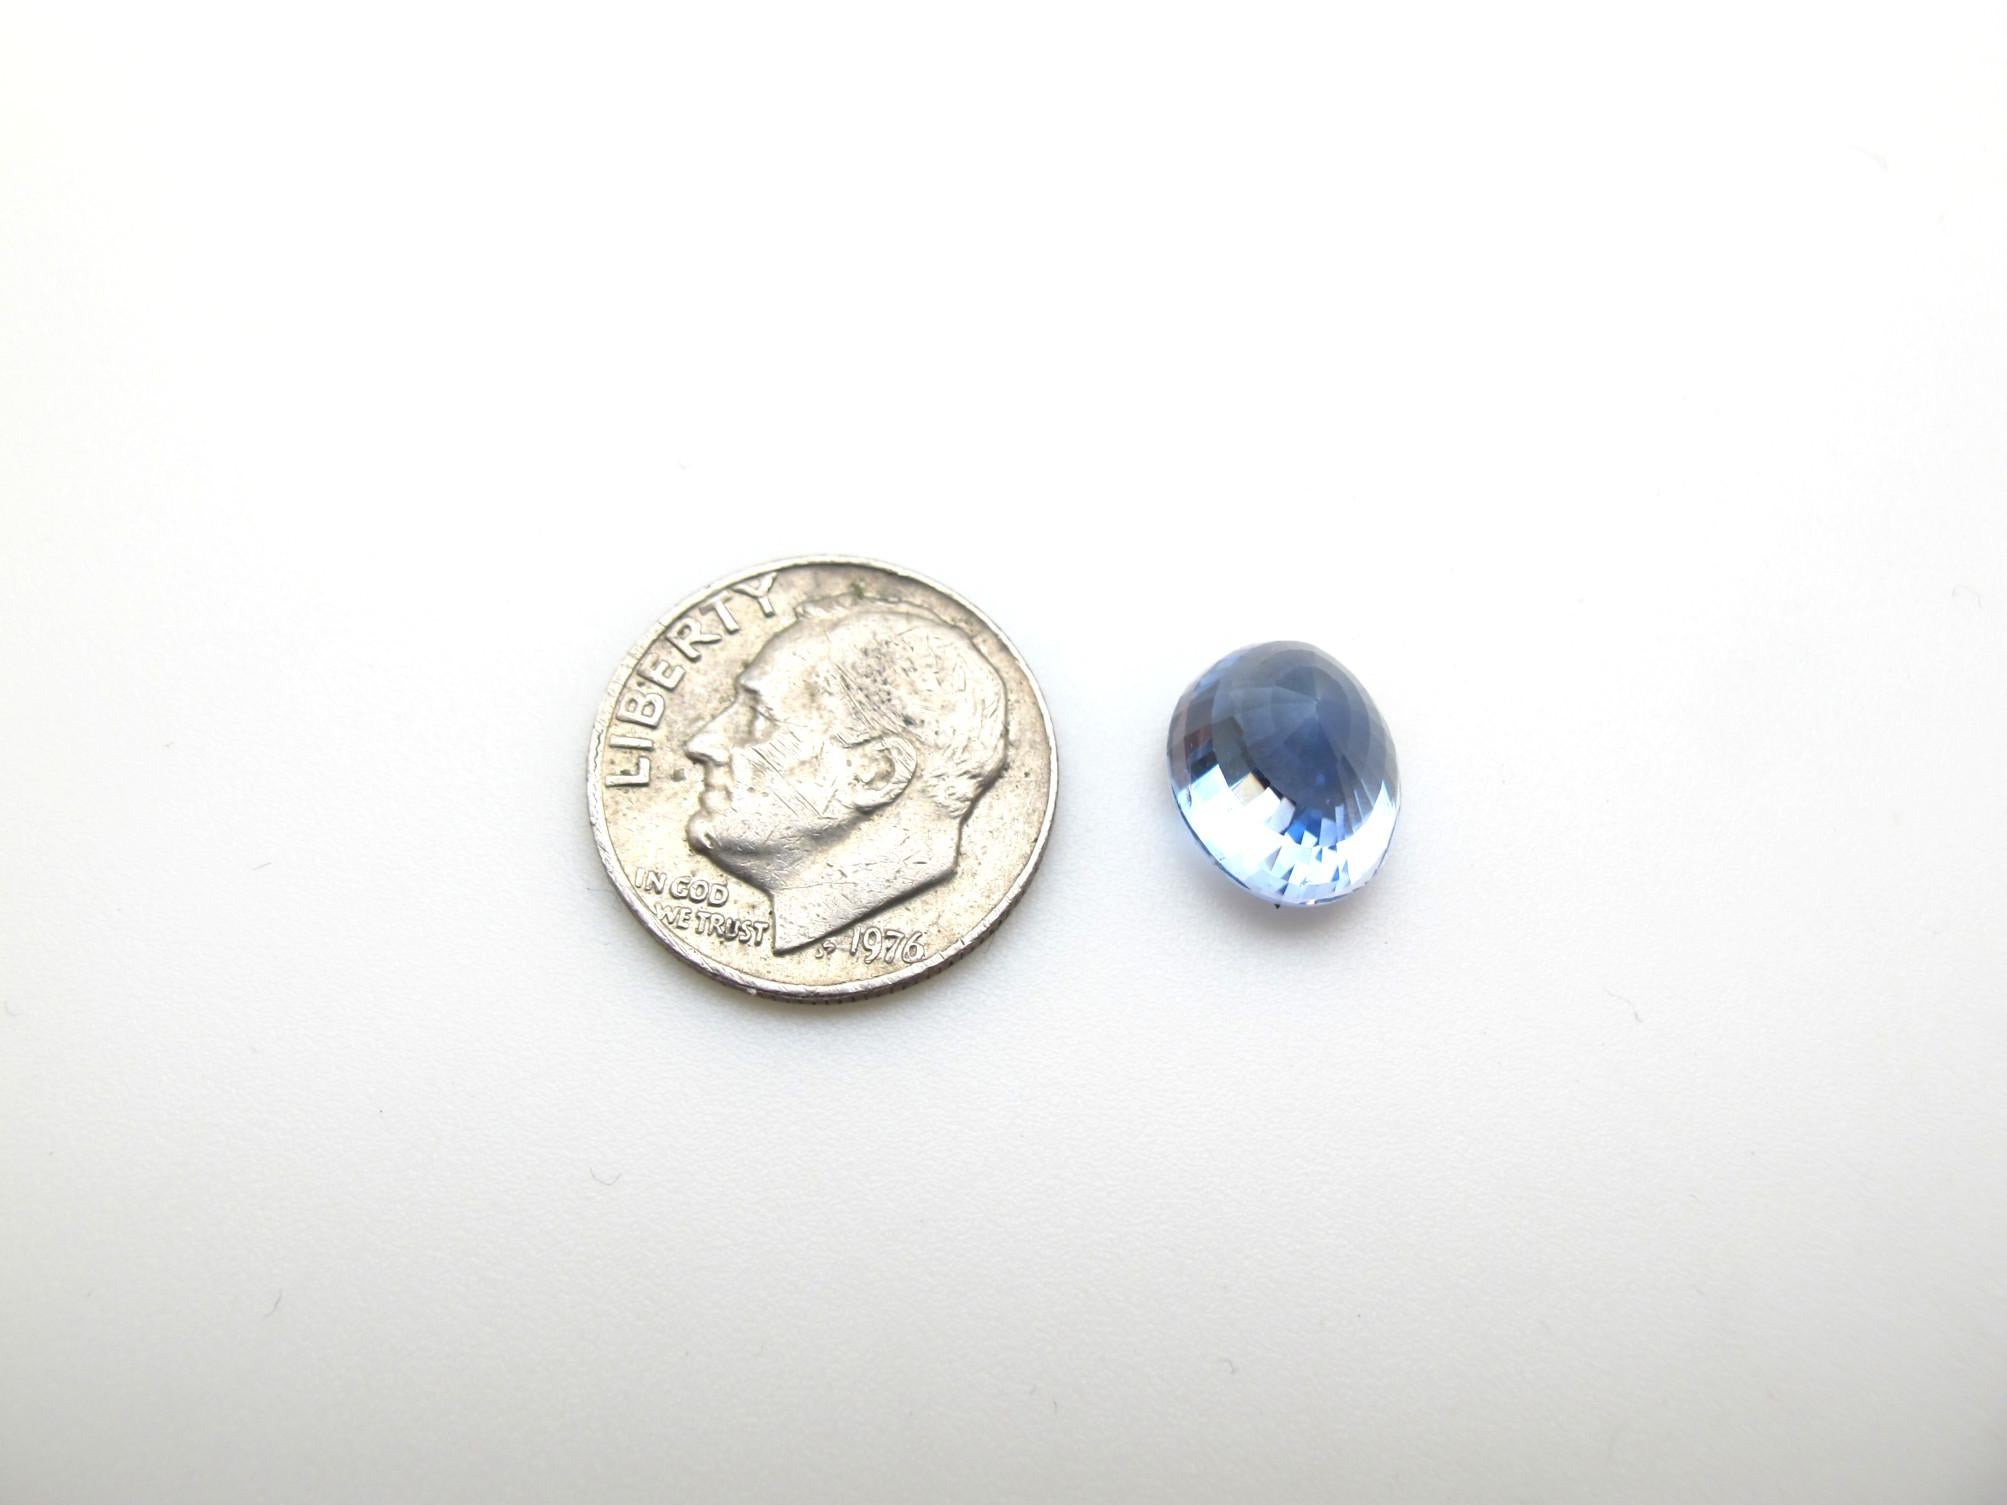 This loose sapphire is a gem quality piece! It is a lively cornflower/powder blue color, free from eye visible inclusions and brilliantly cut.  It measures 10.42 x 8.79 x 8.03 millimeters and weighs 6.36 carats unmounted. It is accompanied by